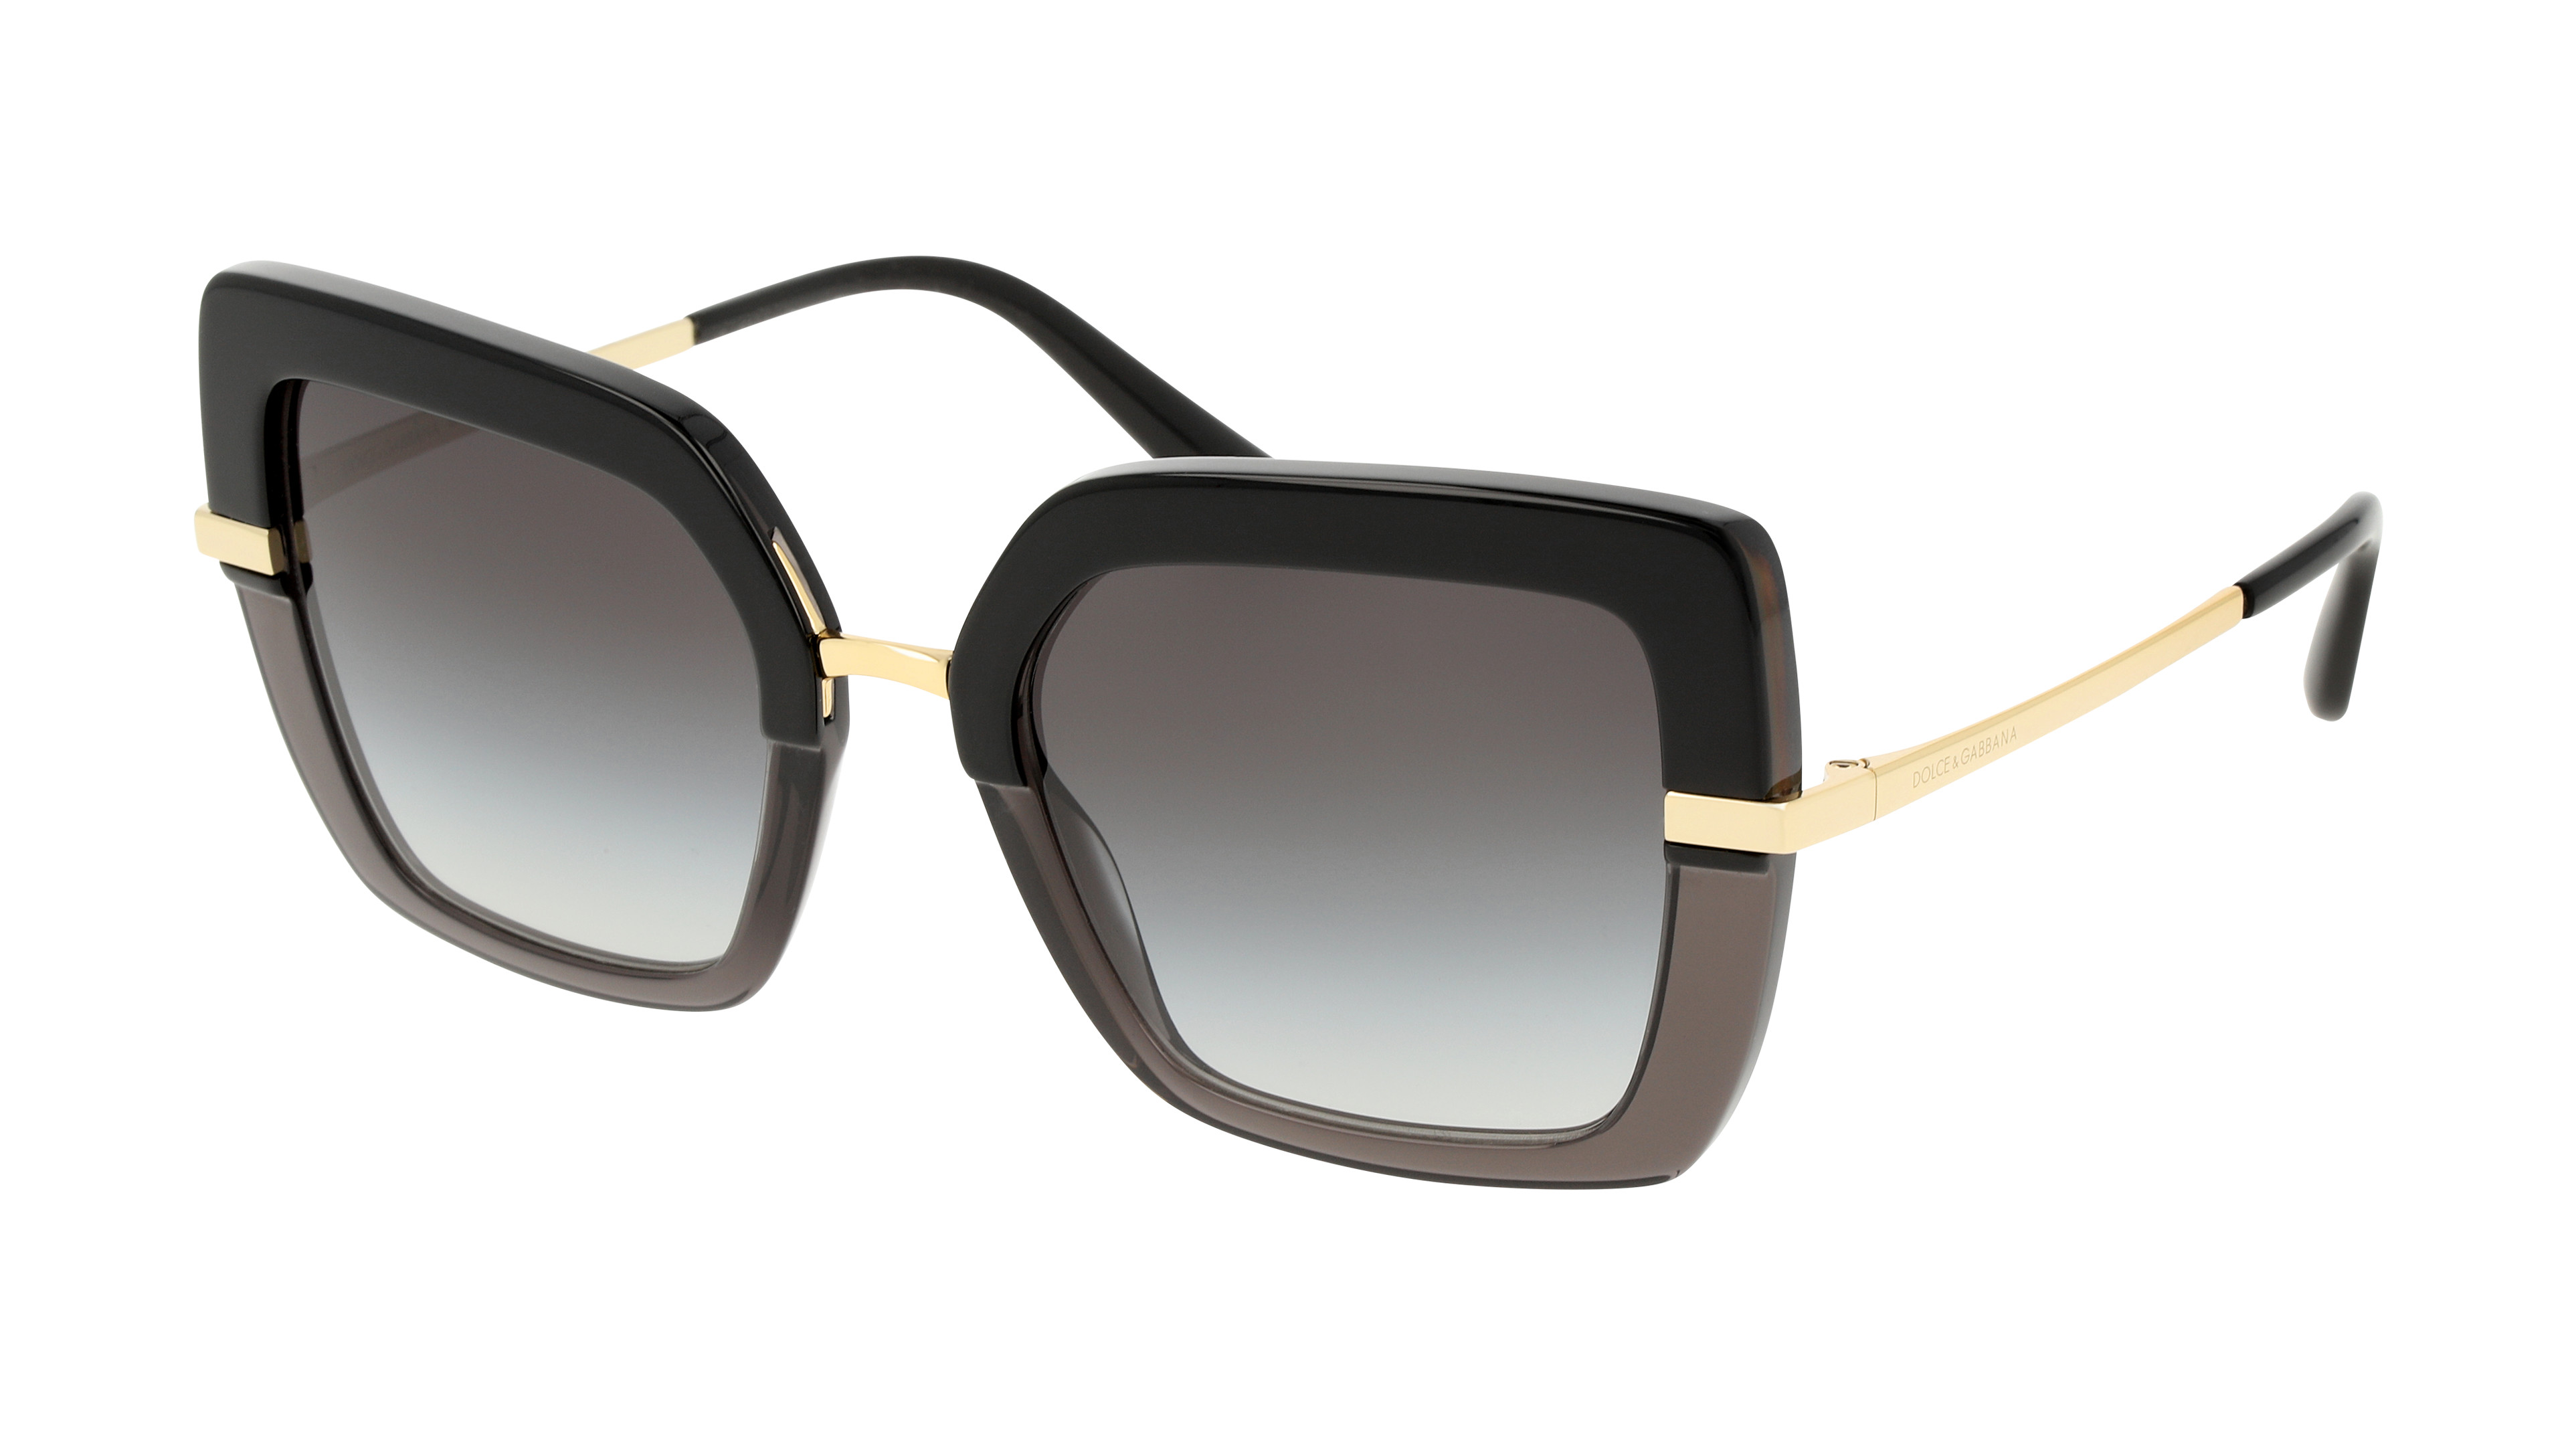 [products.image.angle_left01] Dolce&Gabbana 0DG4373 32468G Sonnenbrille